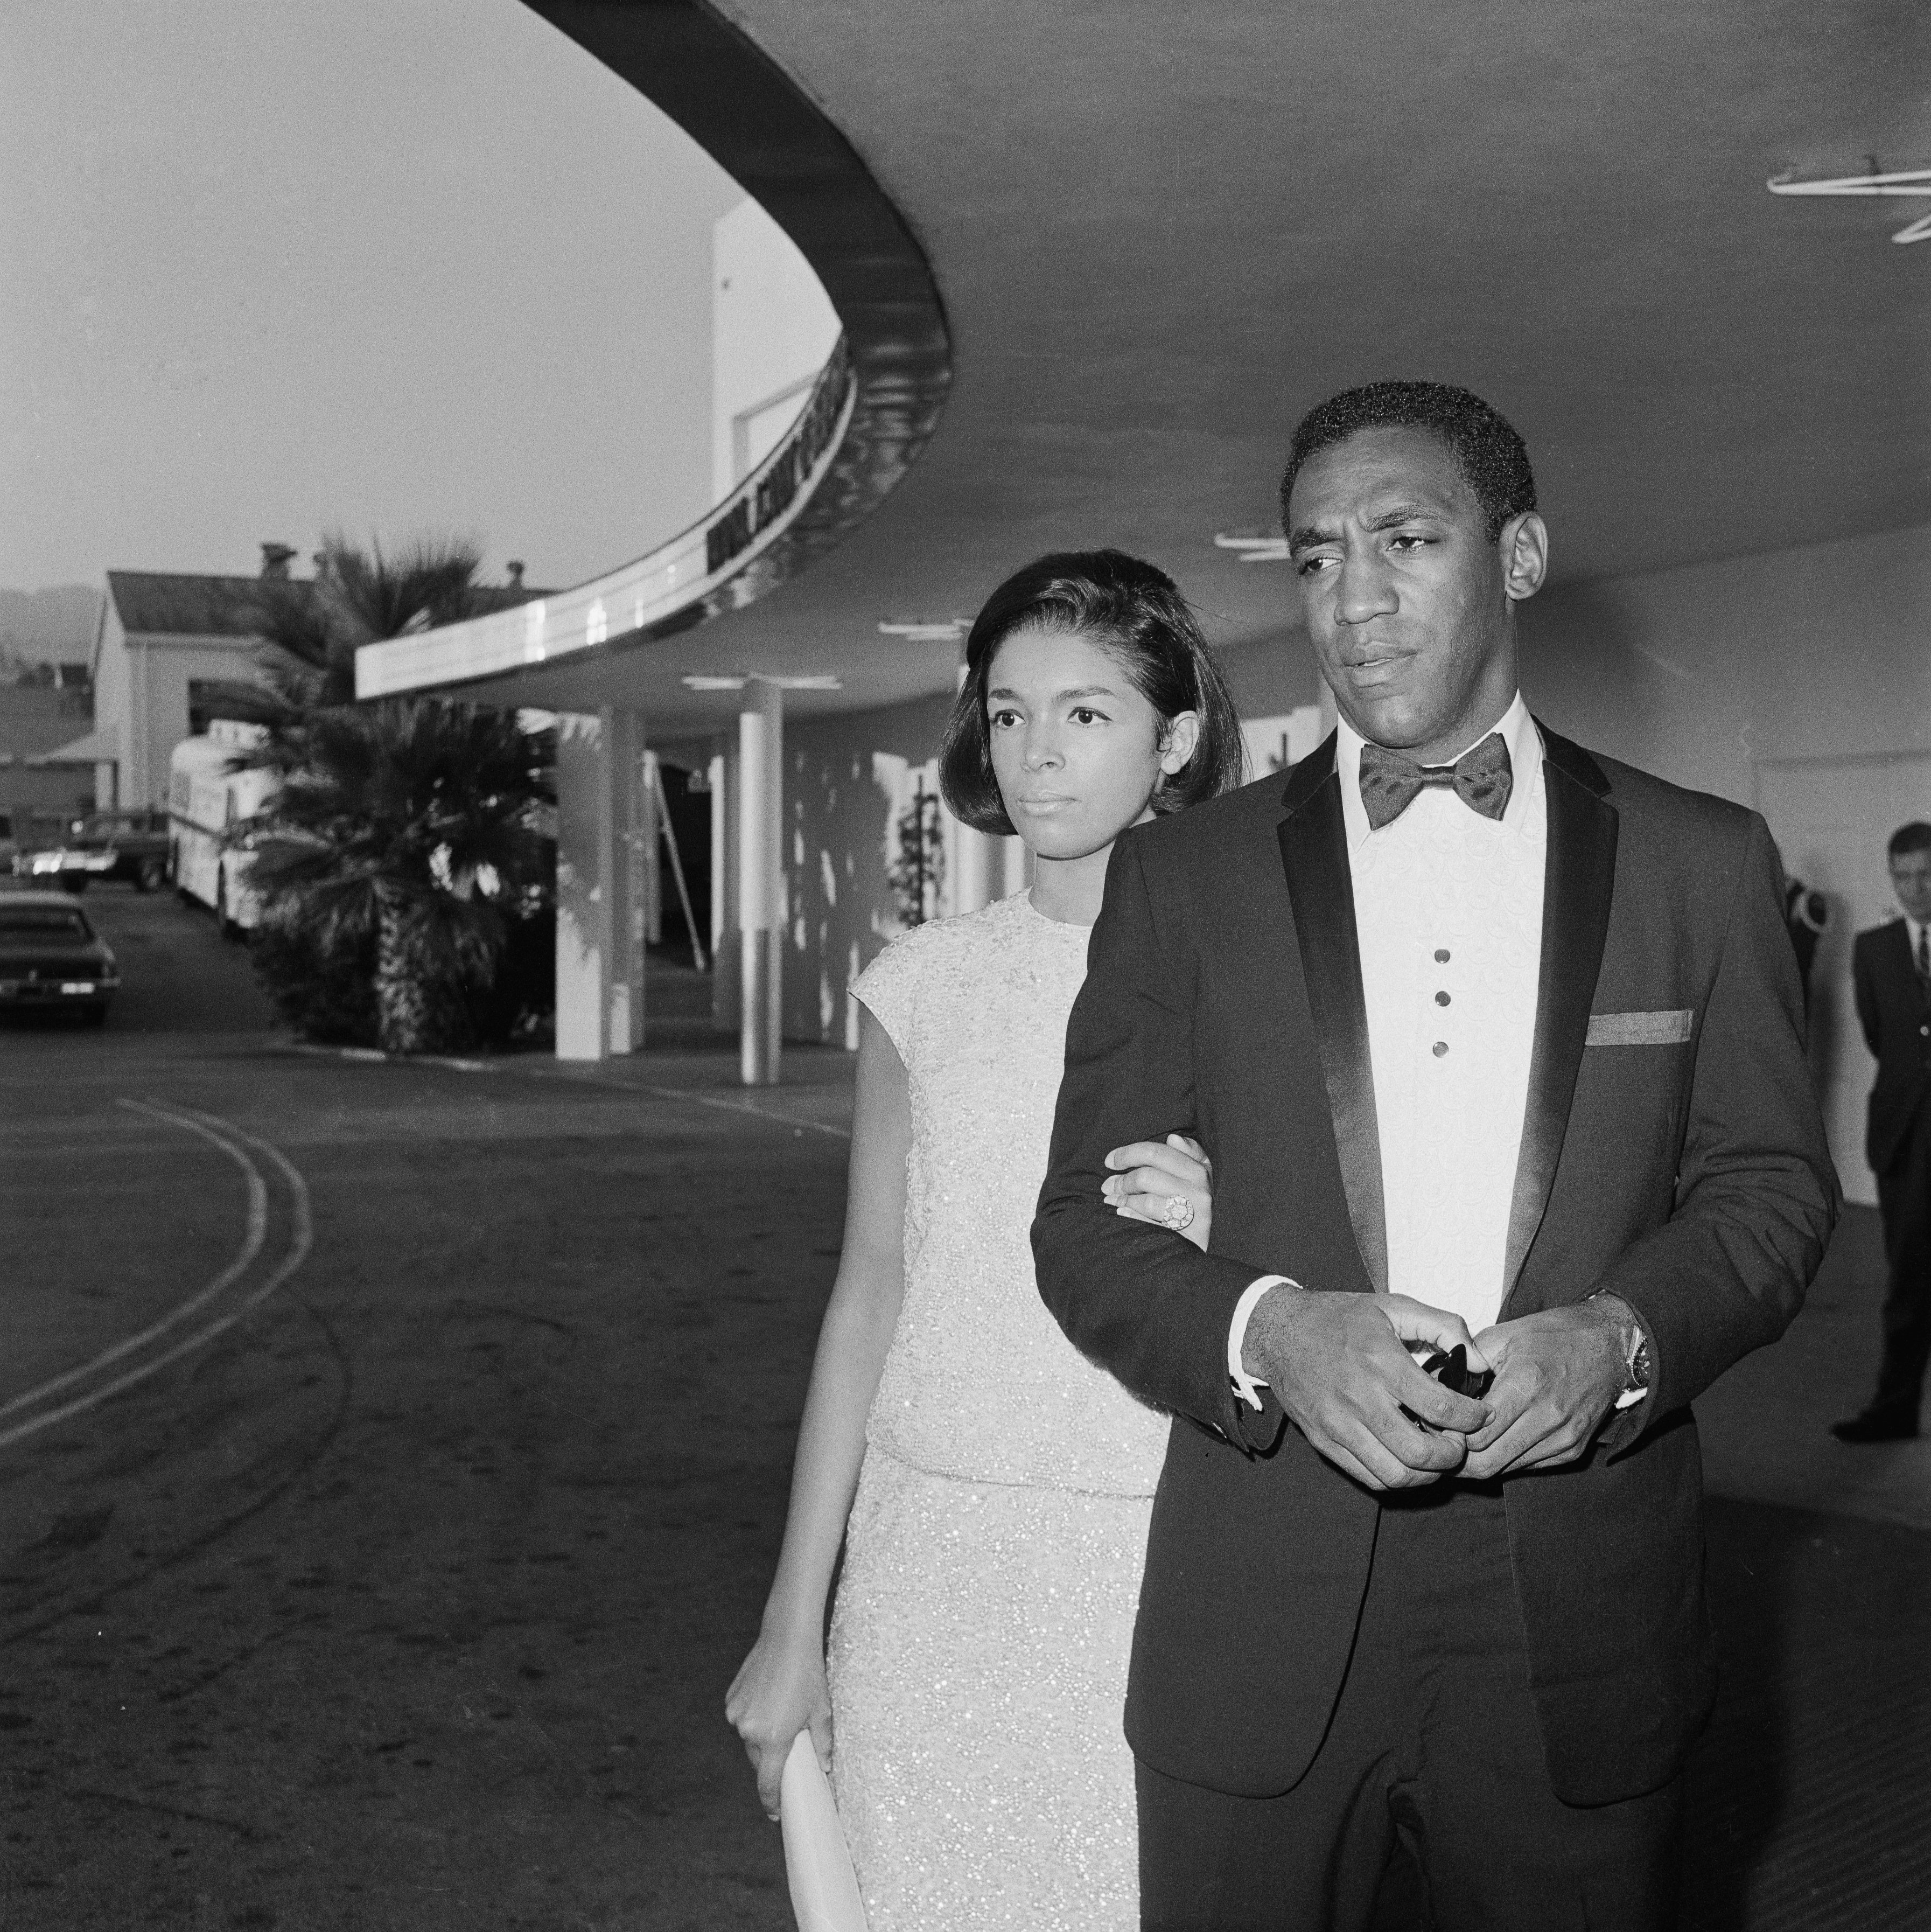 Bill Cosby and his wife, Camille at the Emmy Awards Ceremony in September 1965. | Photo: Getty Images